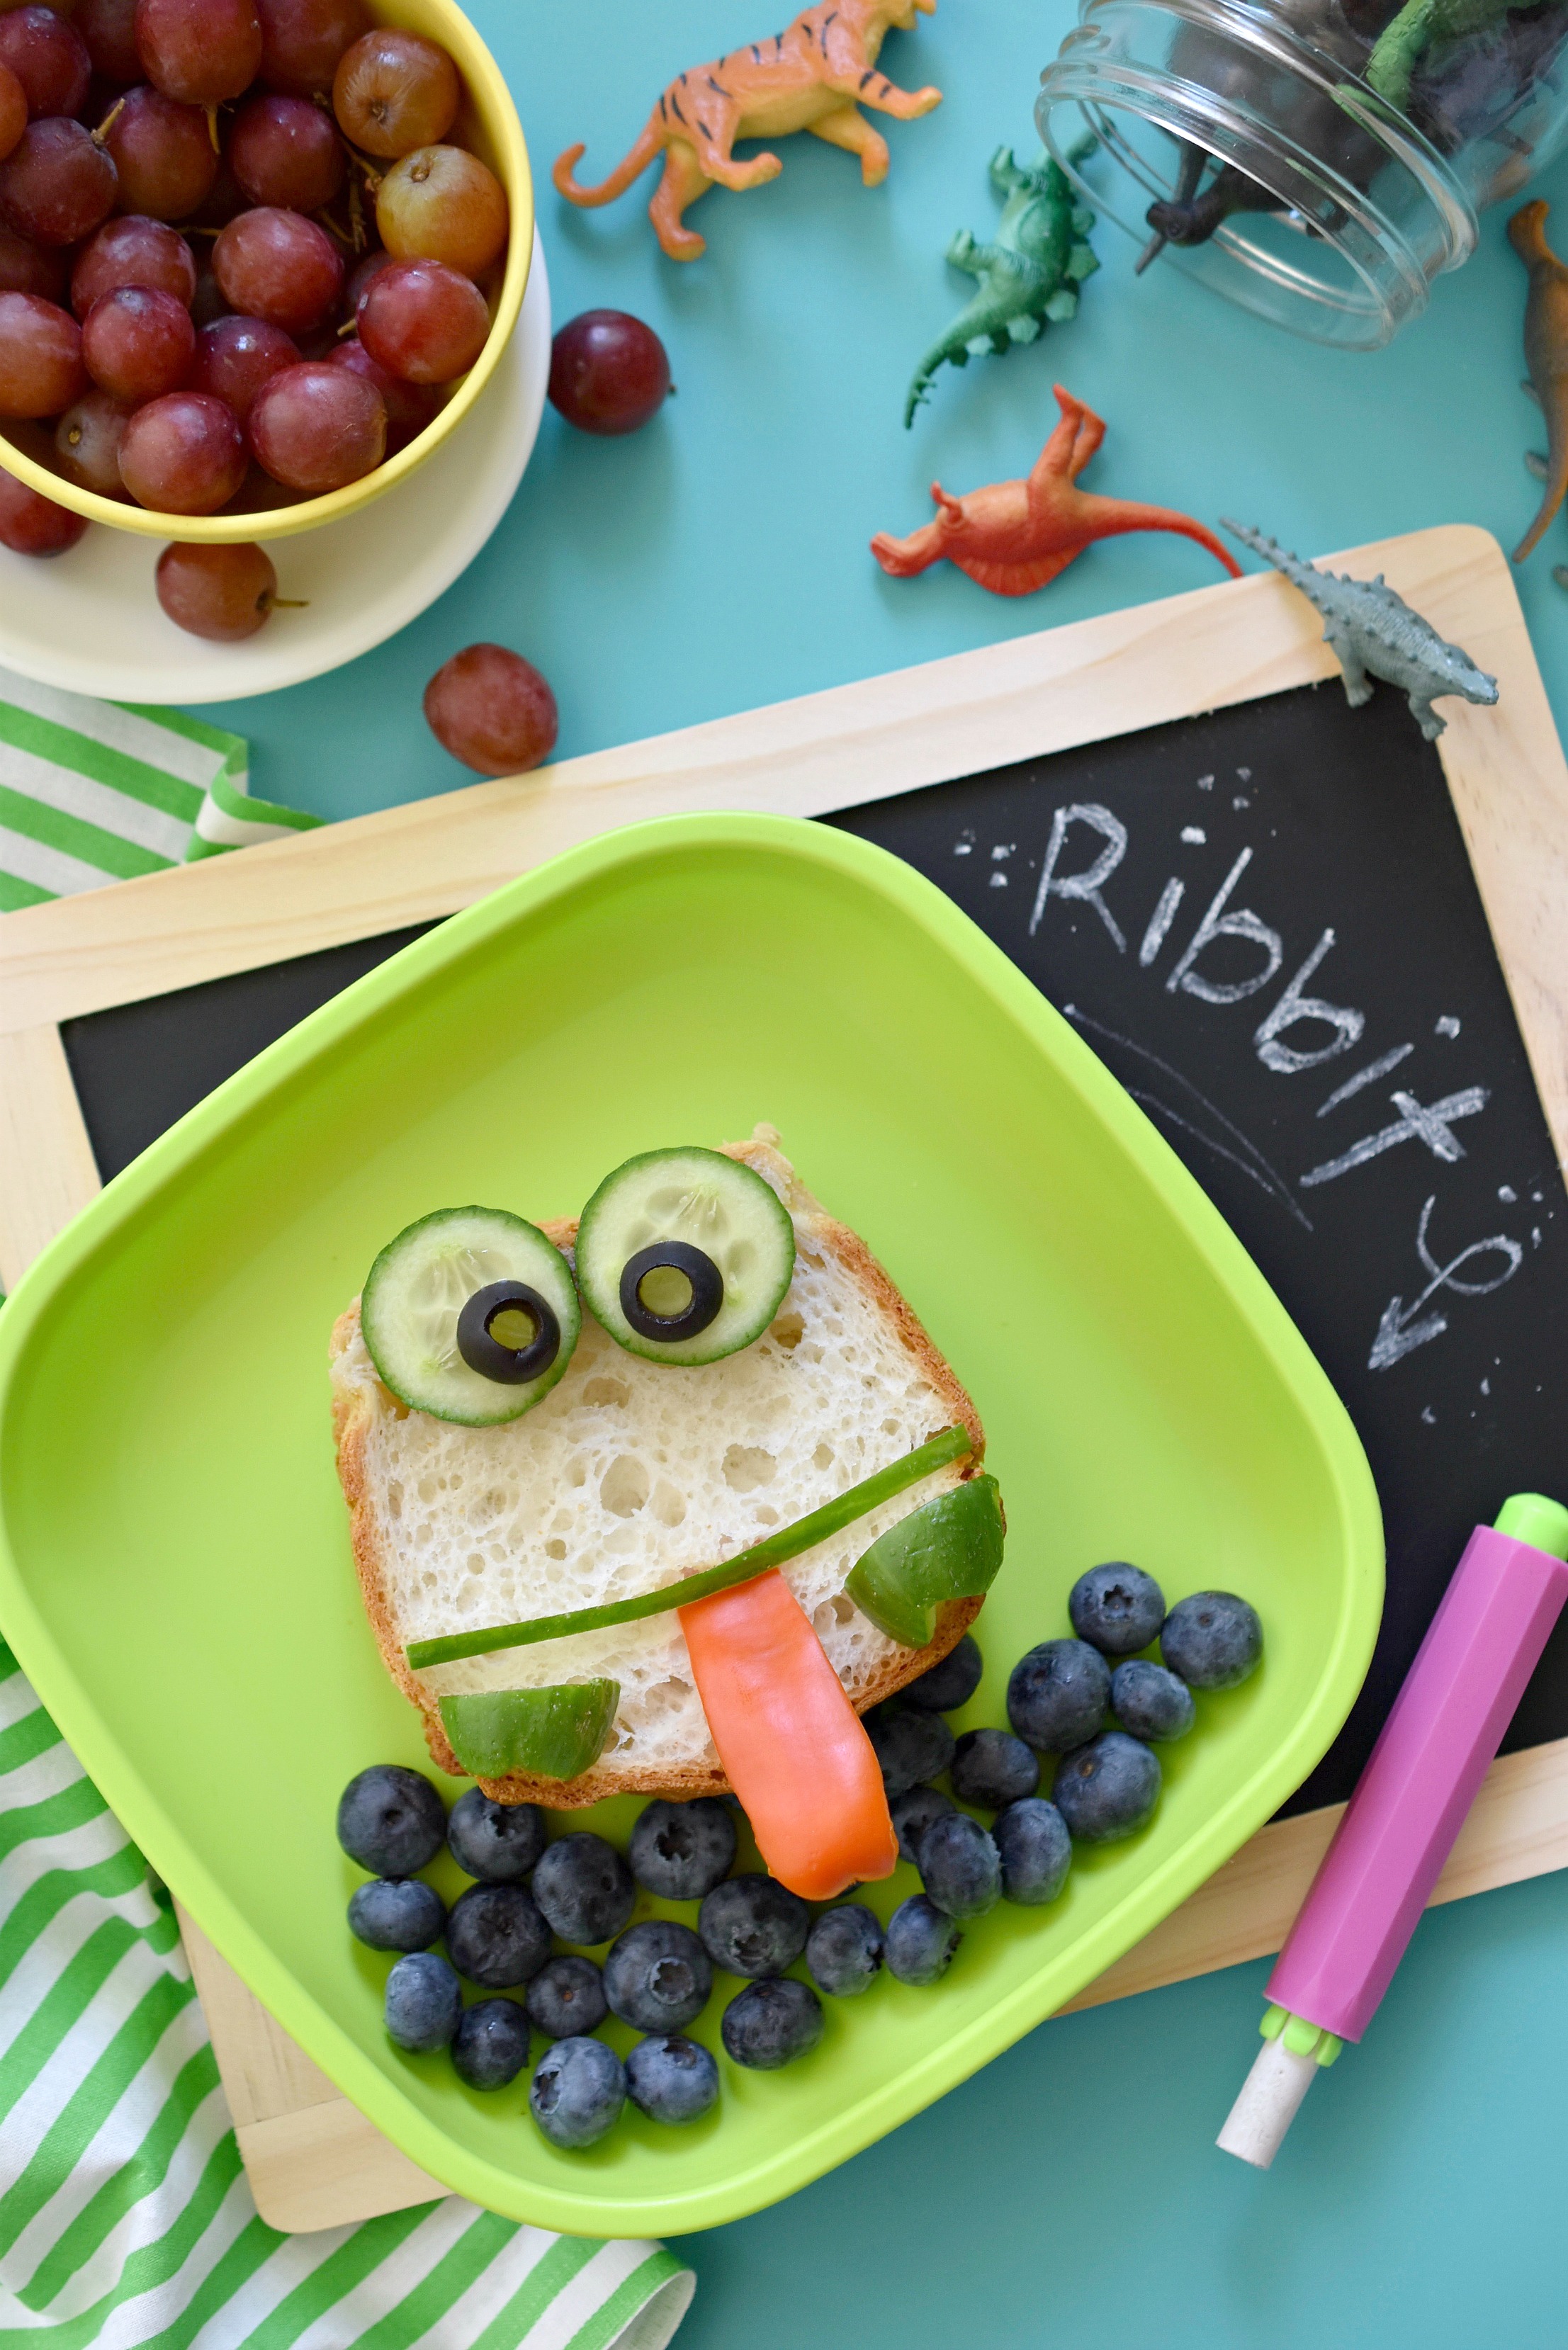 9 Easy Sandwich Free Lunch Box Ideas for Kids - Where Imagination Grows